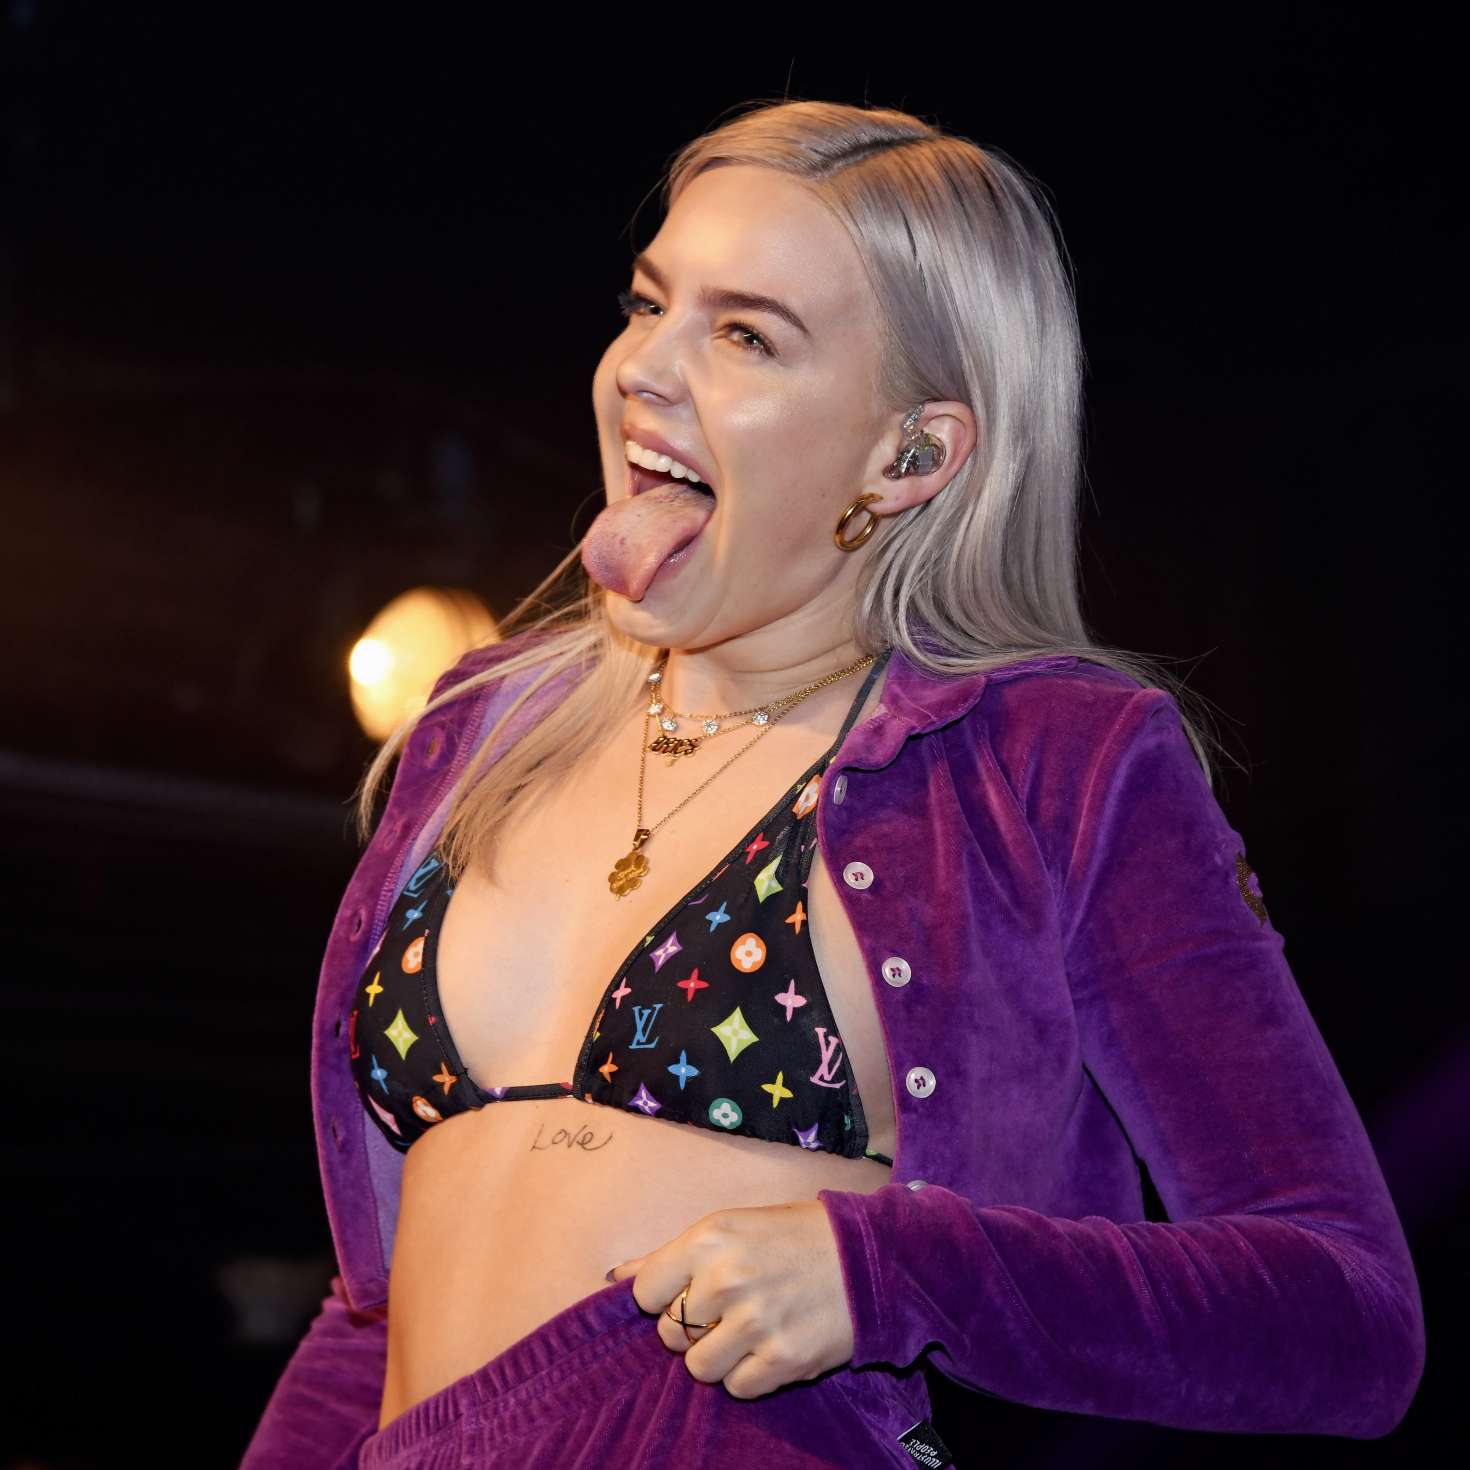 Anne-Marie 2018 : Anne-Marie: Performs her debut album at G-A-Y Club -05. 